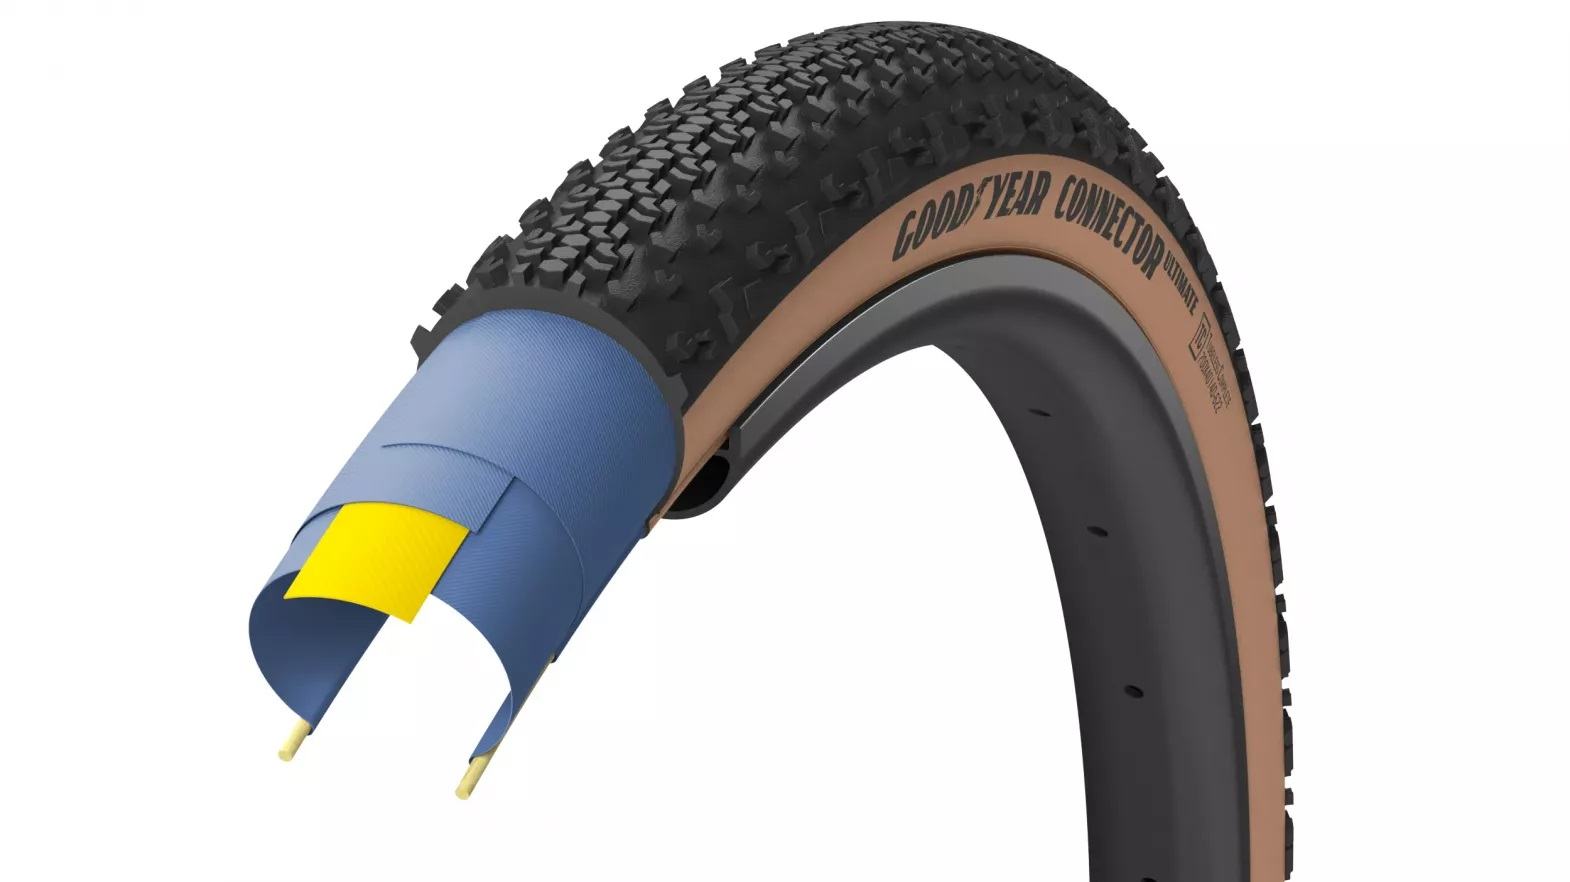 Покришка 700x35 GoodYear CONNECTOR tubeless complete, folding, black/tan, 120tpi